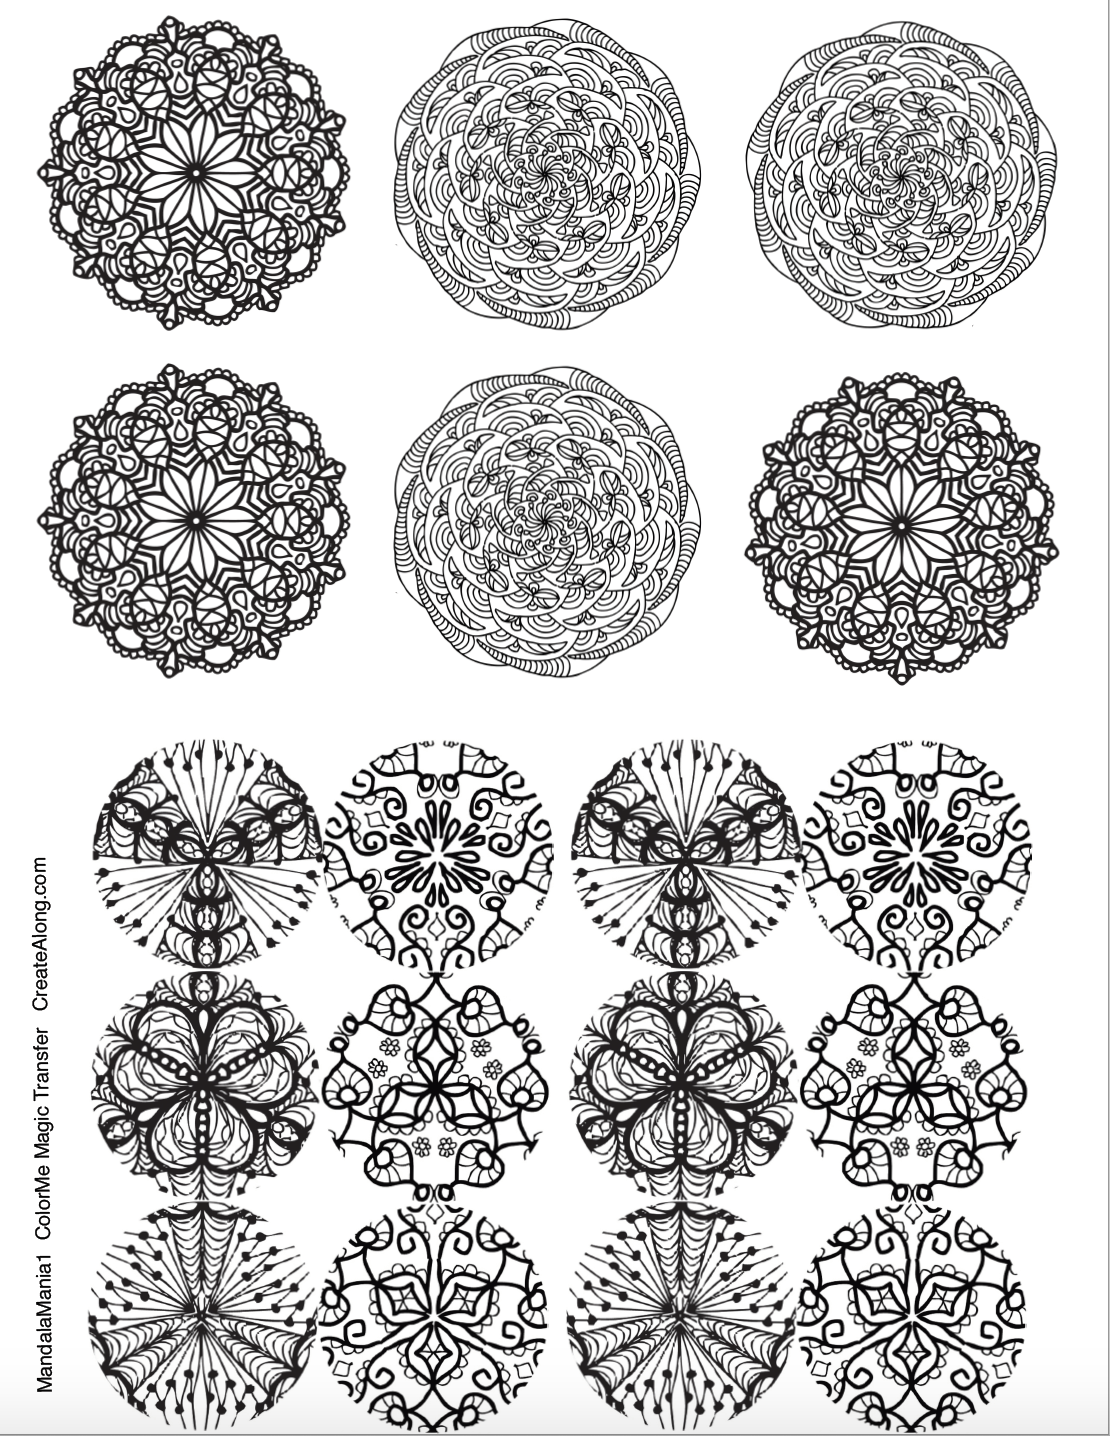 Digital Mandala Mania Image Transfer PDF for creating images on raw polymer clay and for use with Magic Transfer Paper